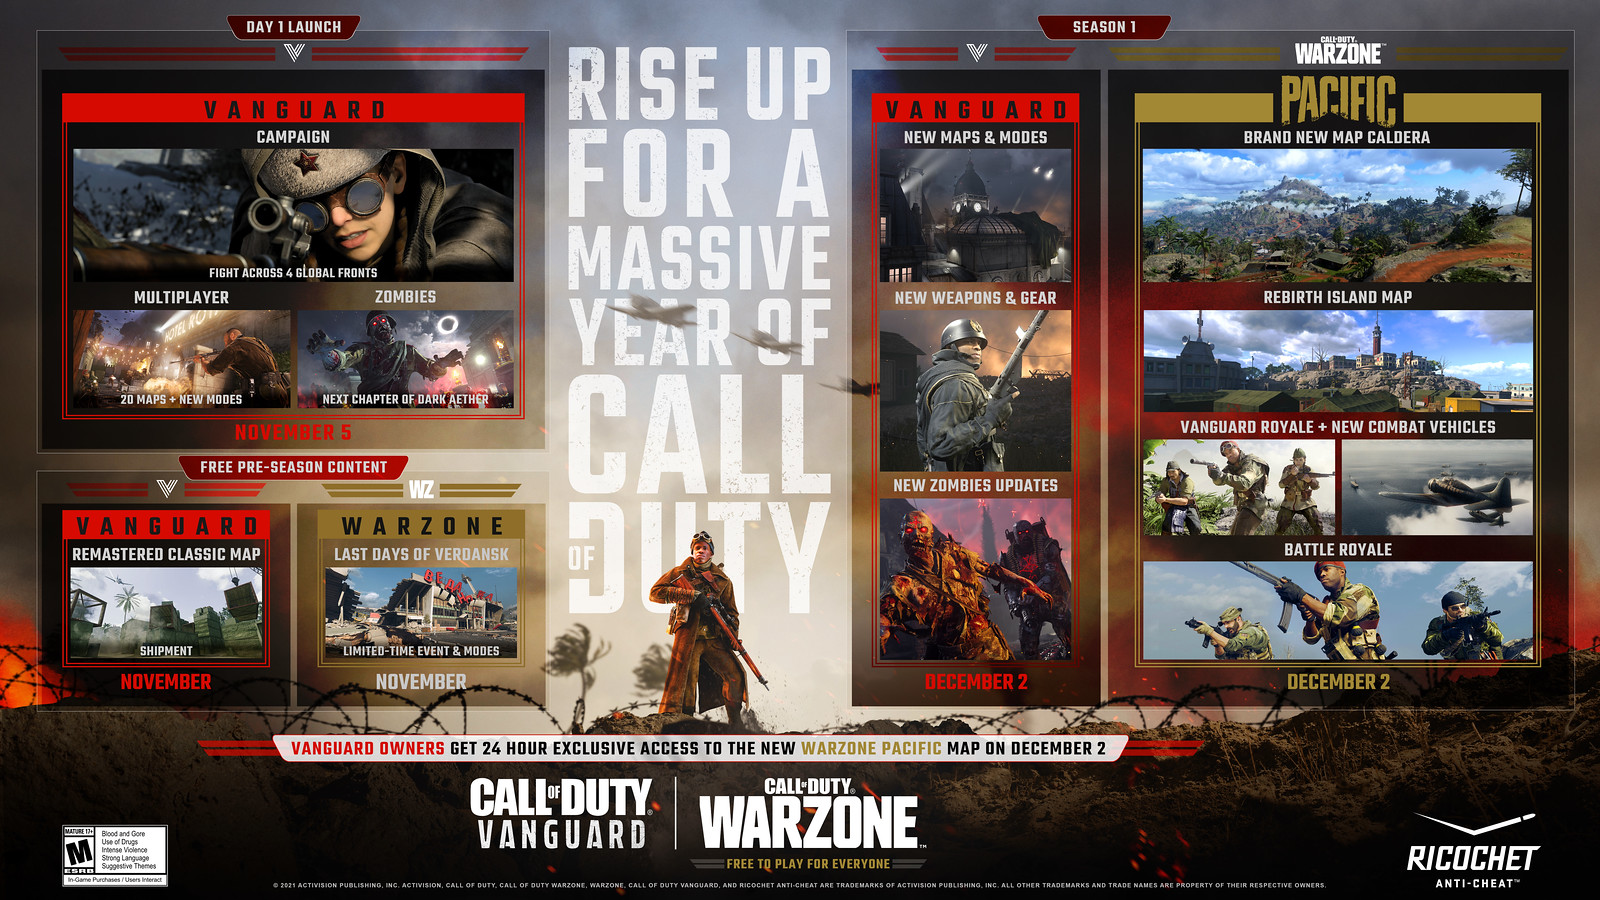 Activision Details Call of Duty: Vanguard Season One Content, New Warzone Map 